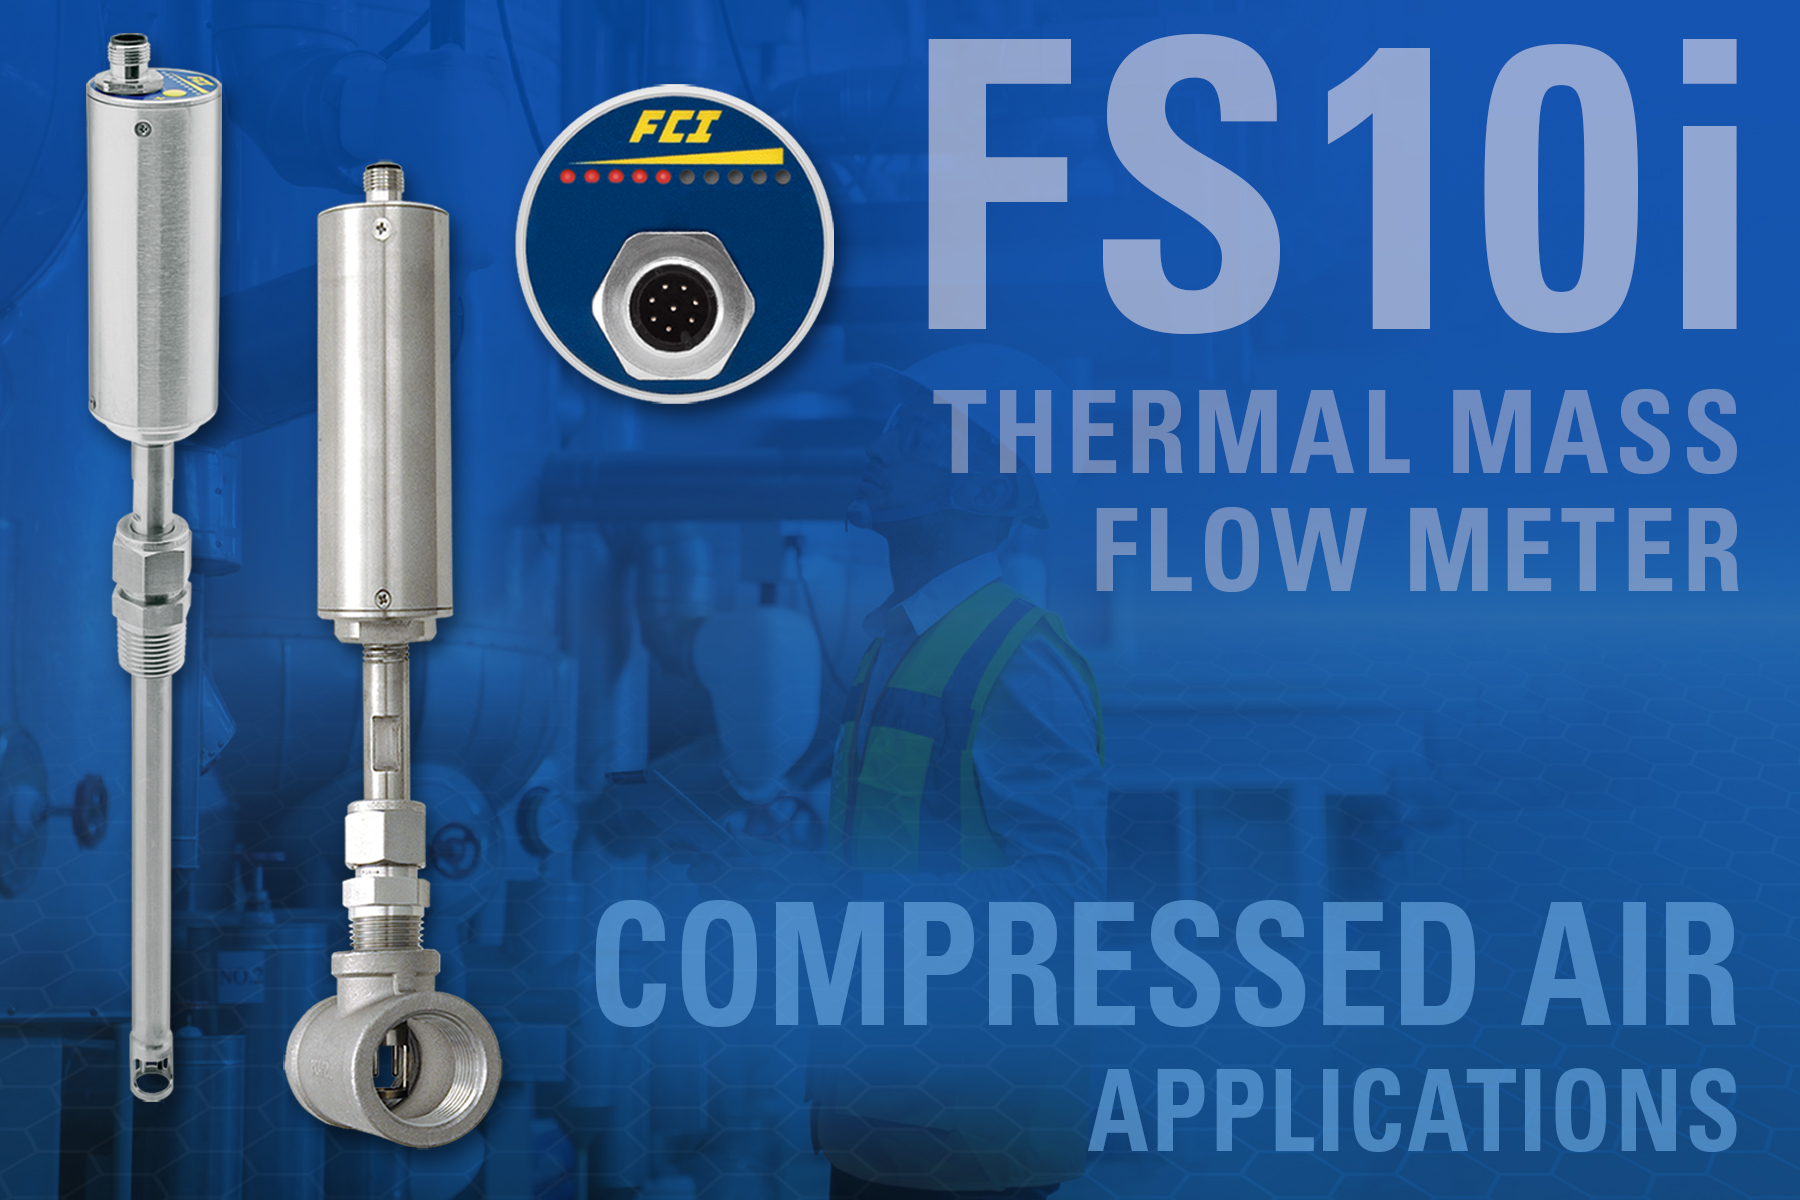 Cutting Compressed Air Use Cost and Maintenance With FCI’s SIL-2 Rated Compressed Air Thermal Flow Meter